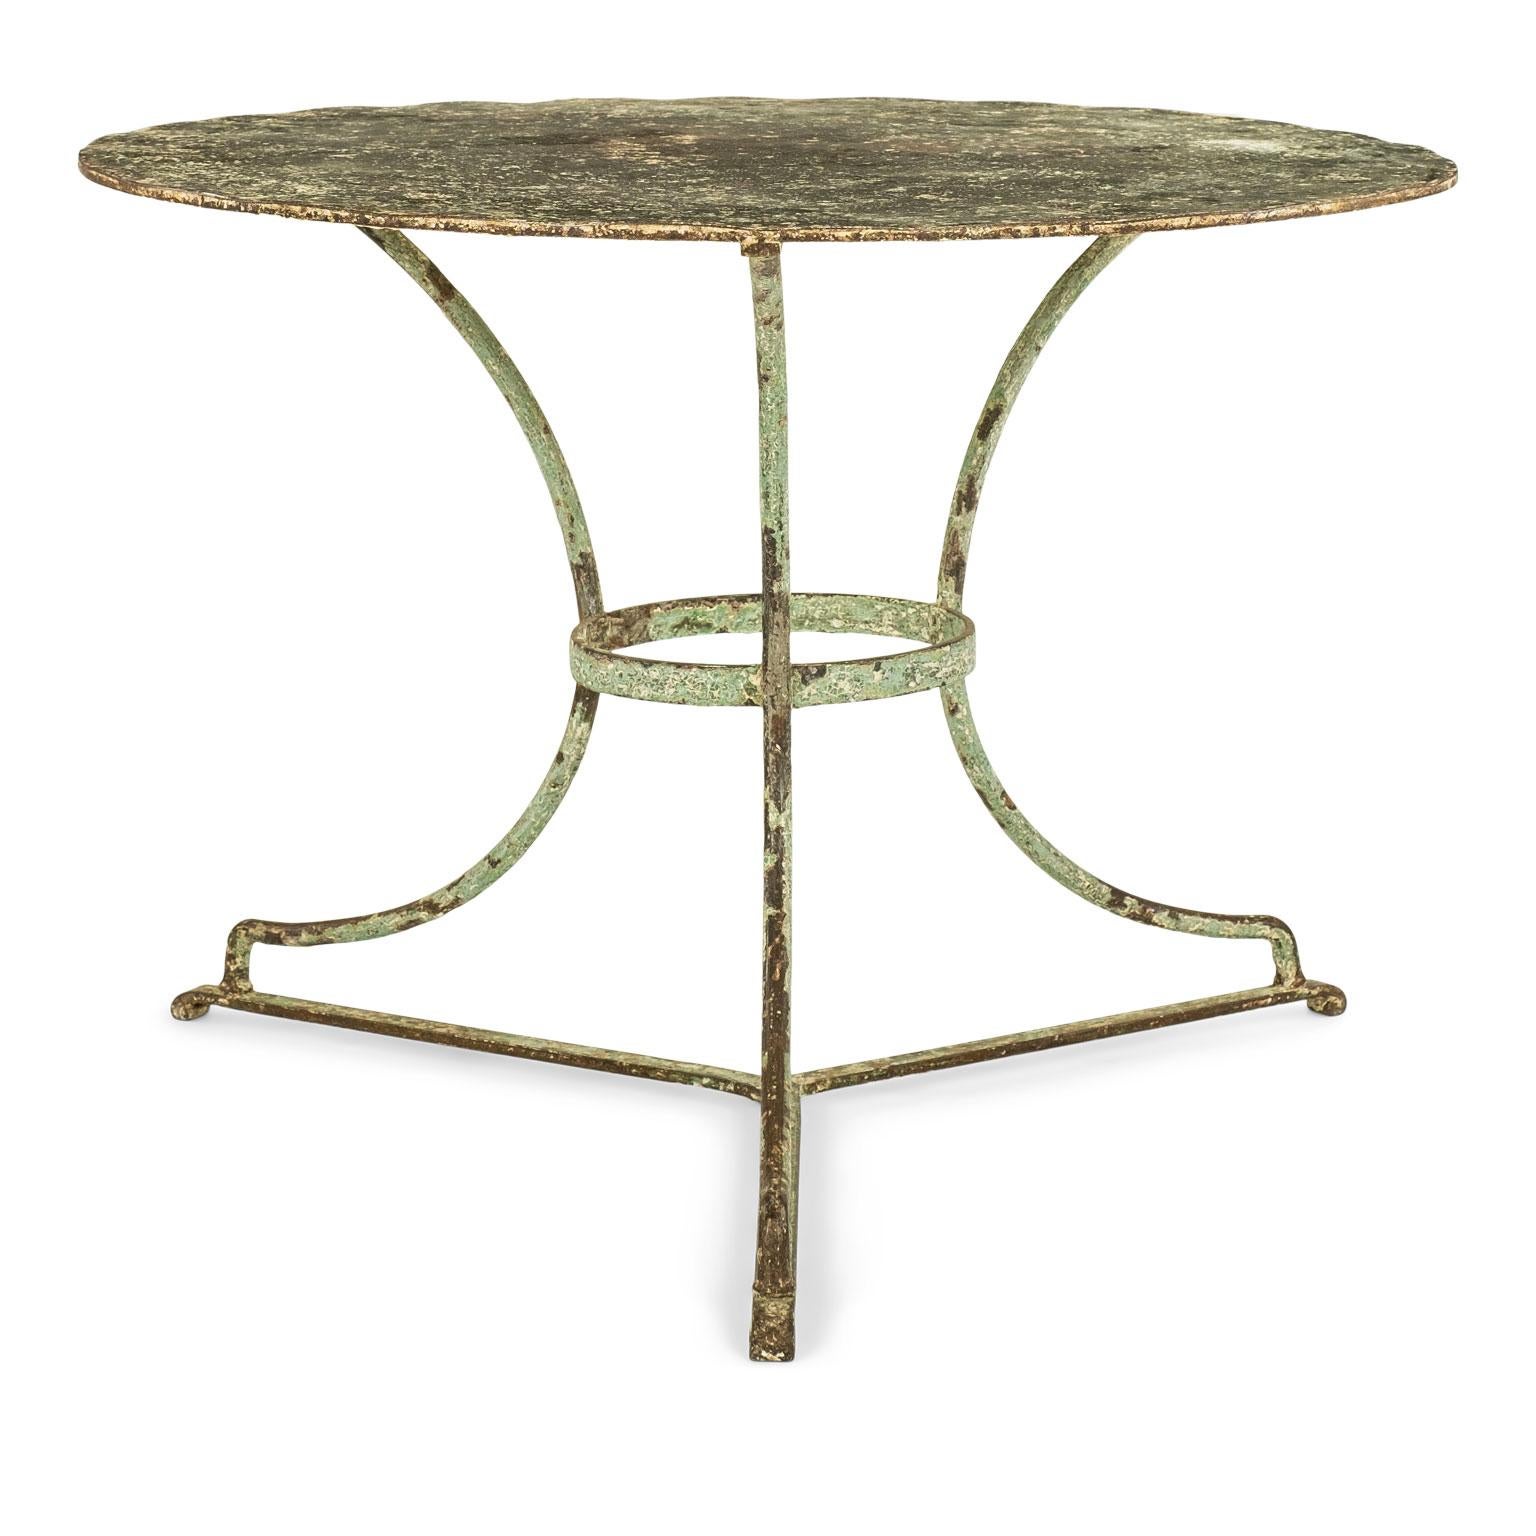 Vintage French iron round garden table circa 1920-1940: round painted steel top raised upon three-legged iron base. Remnants of old painted finish. Nice large scale.